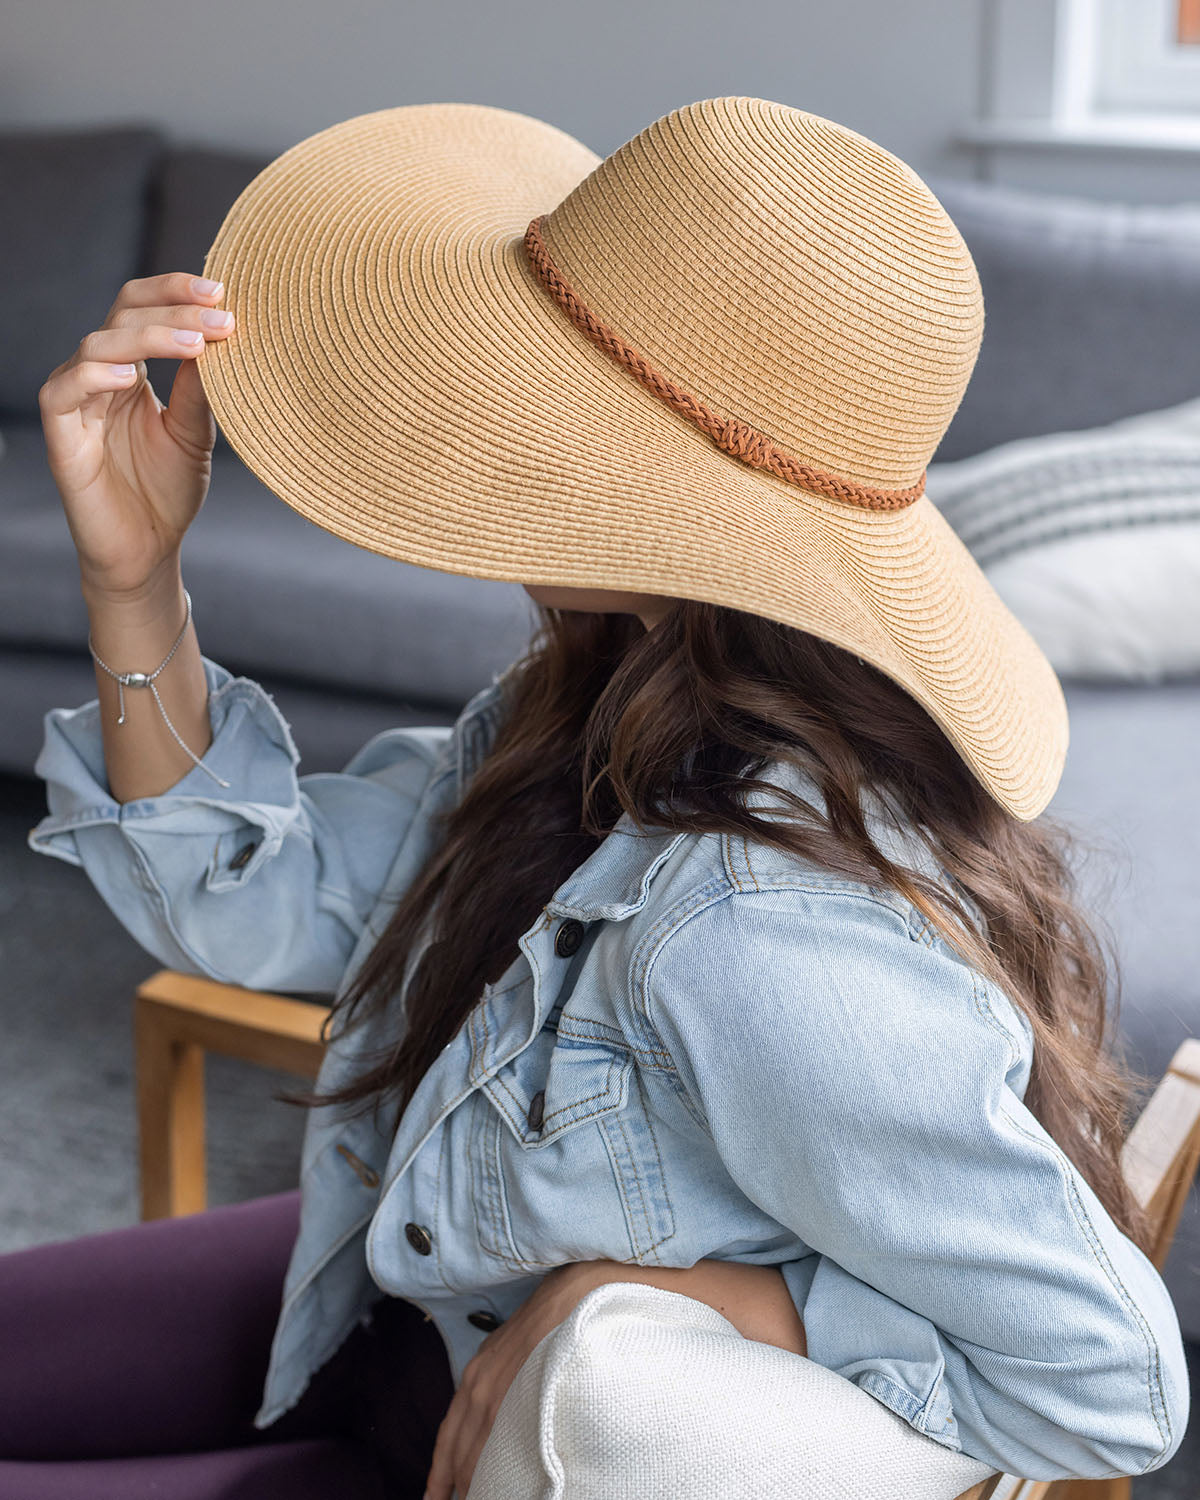 Khaki Beach Straw Hat FINAL SALE Grace And Lace, 45% OFF